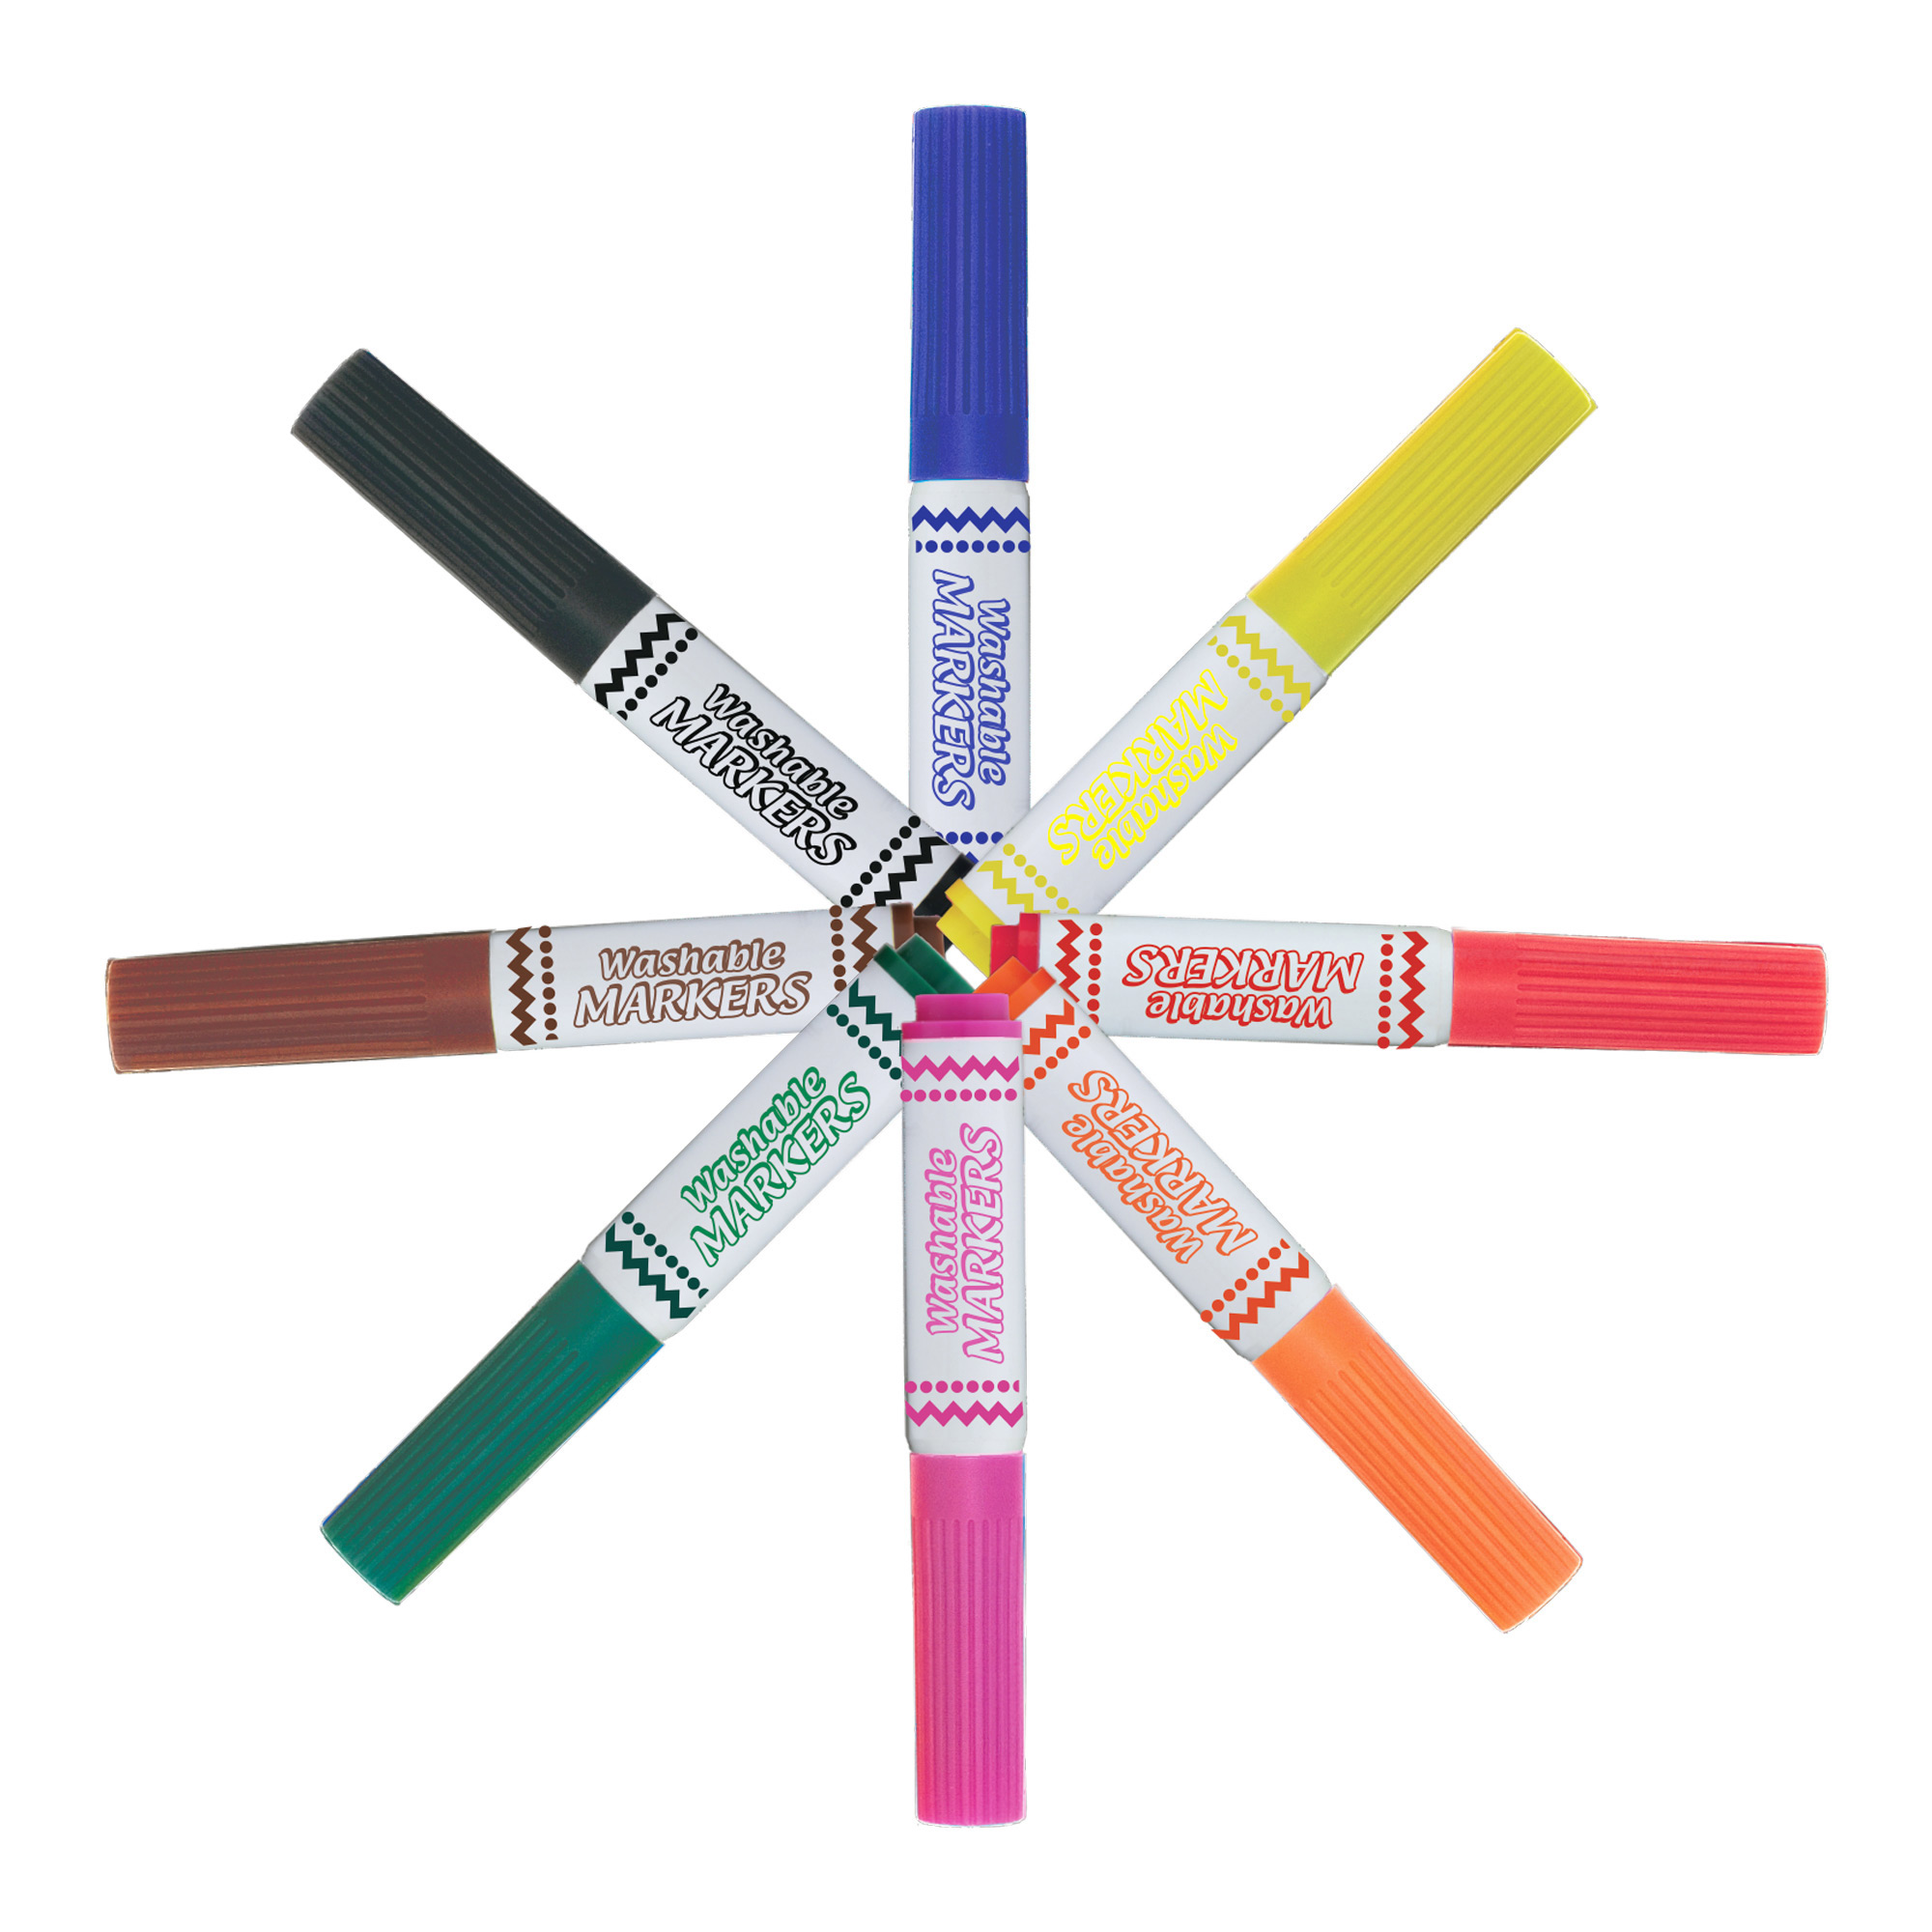 Knowledge Tree  Pacon Corporation D.b.a. Jumbo Markers, 3 Assorted Colors,  5/8 Nib, 3 Markers